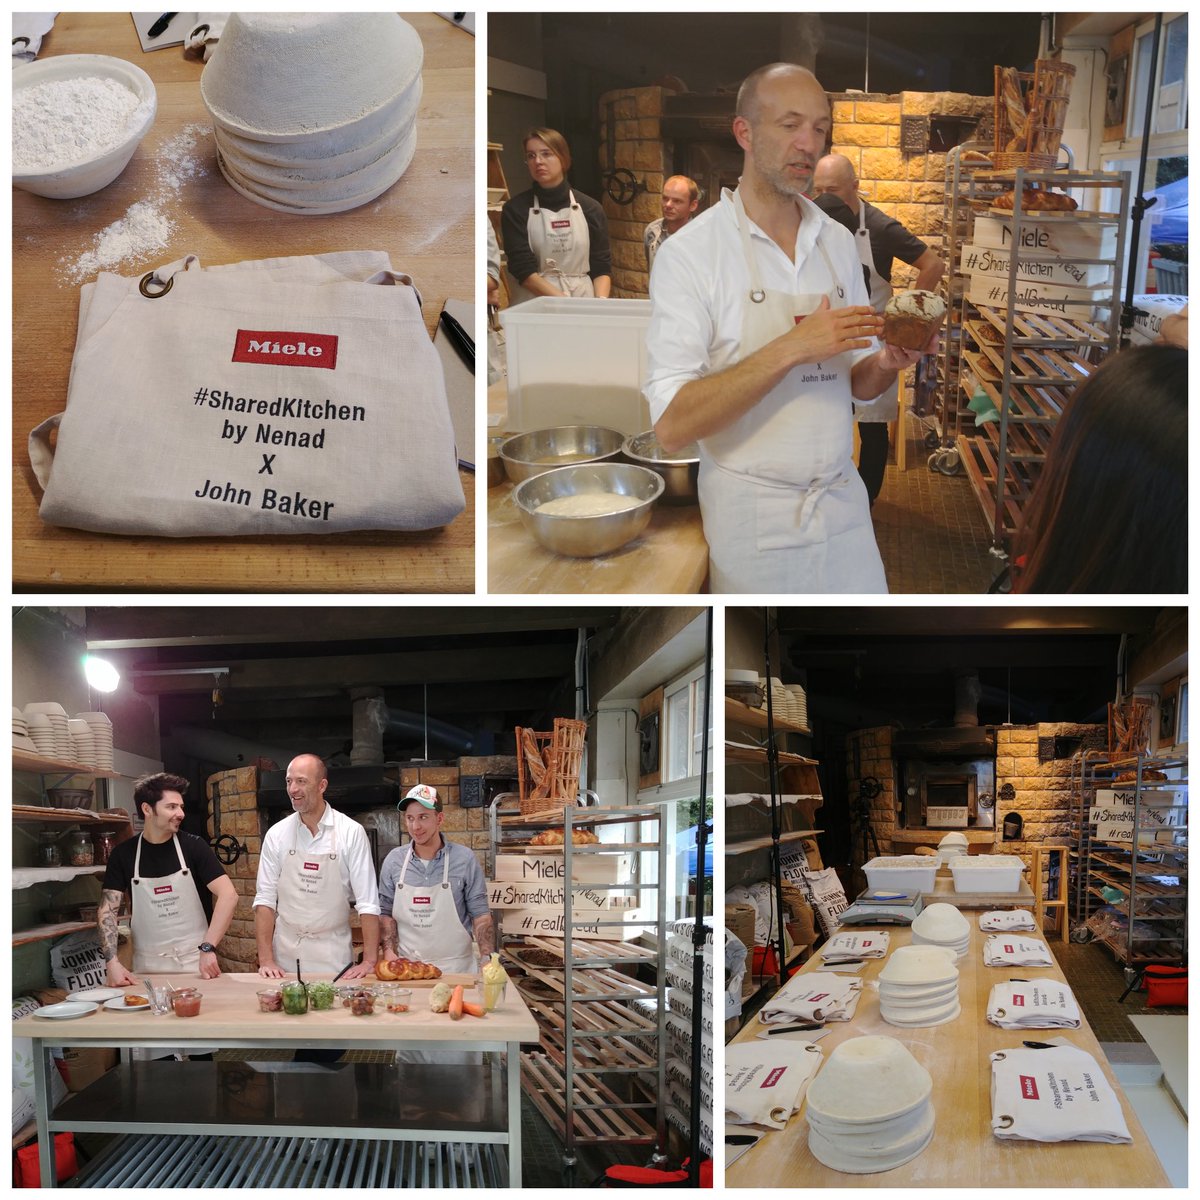 An excellent event with the best bread in town. Thanks to our hosts, friends and colleagues. #SharedKitchen #realBread